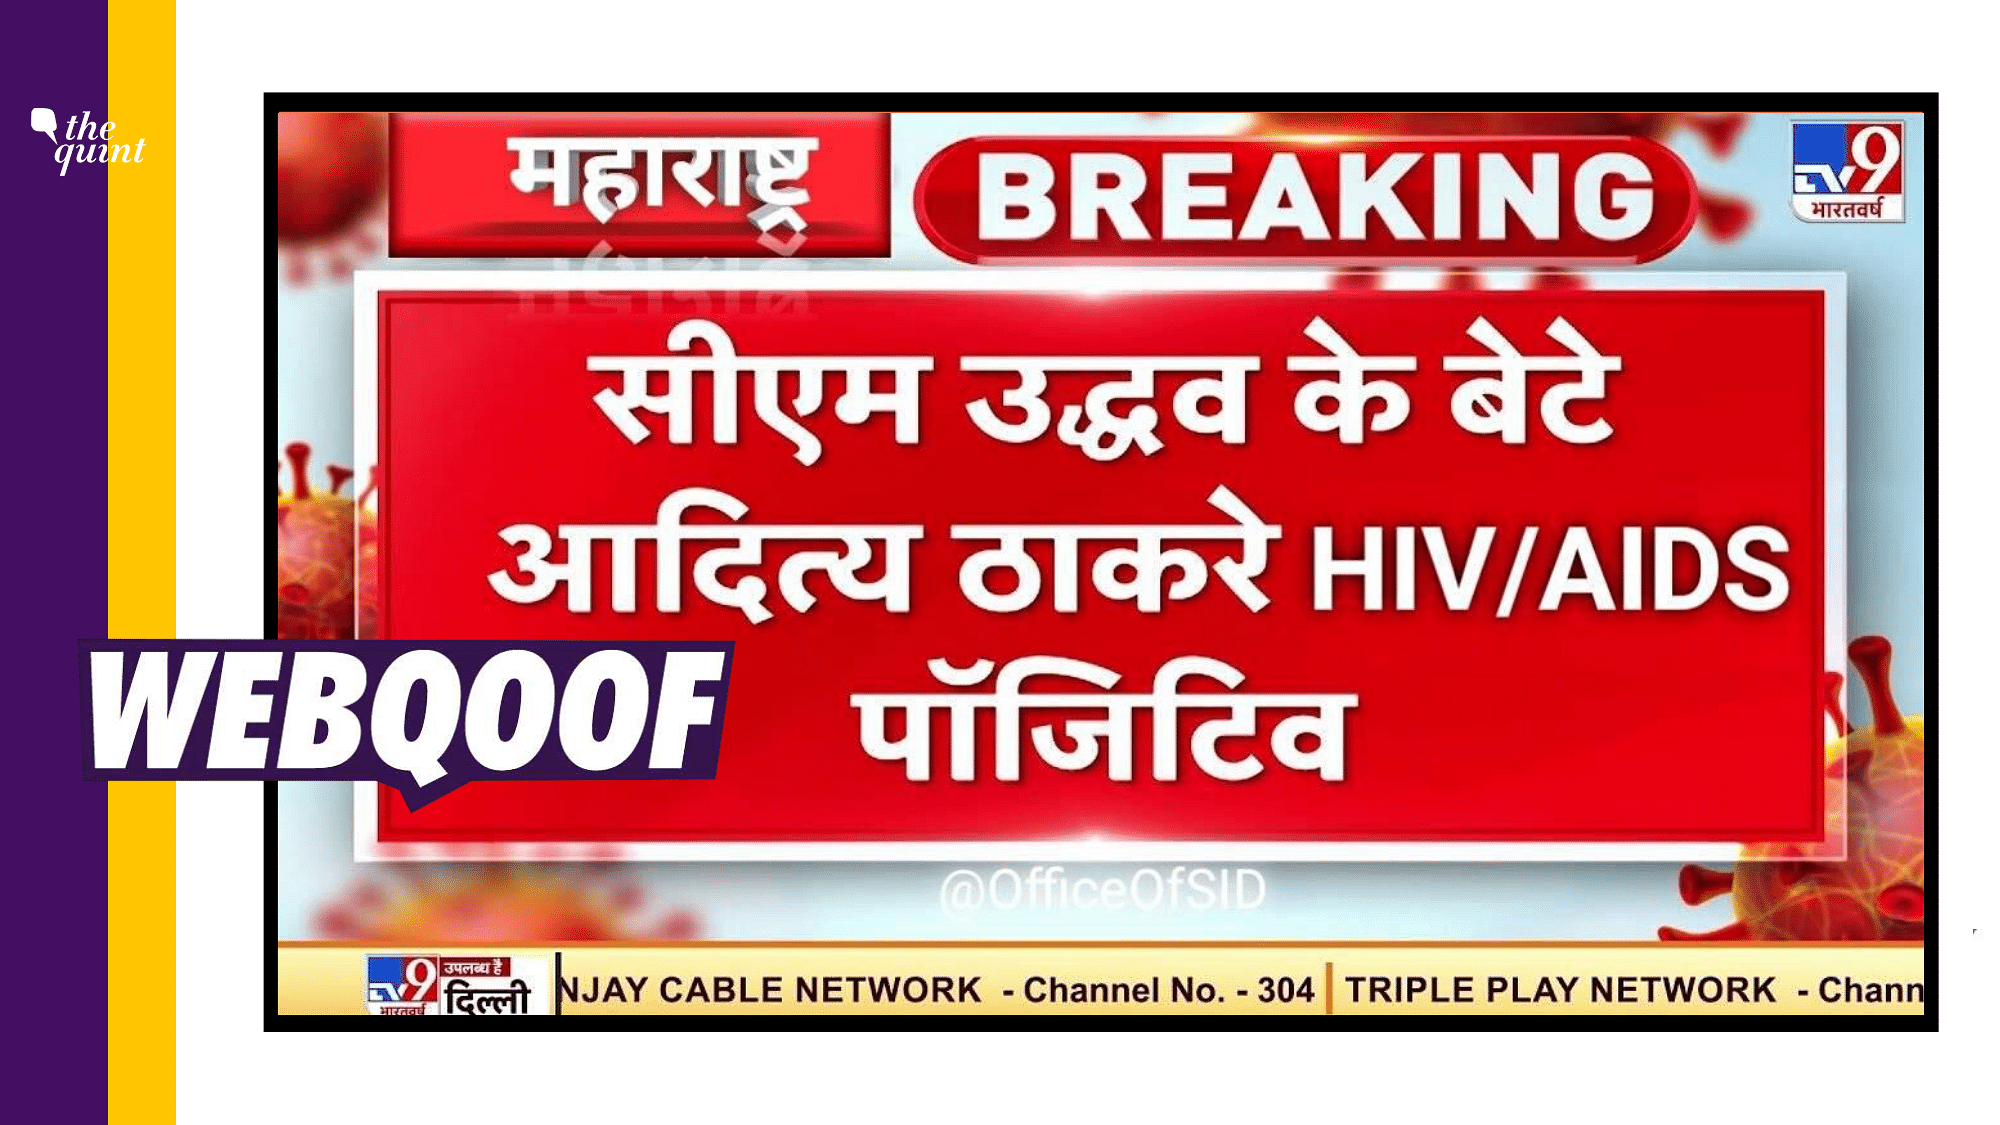 The news bulletin has been edited to falsely claim Thackeray tested positive for HIV/AIDS.